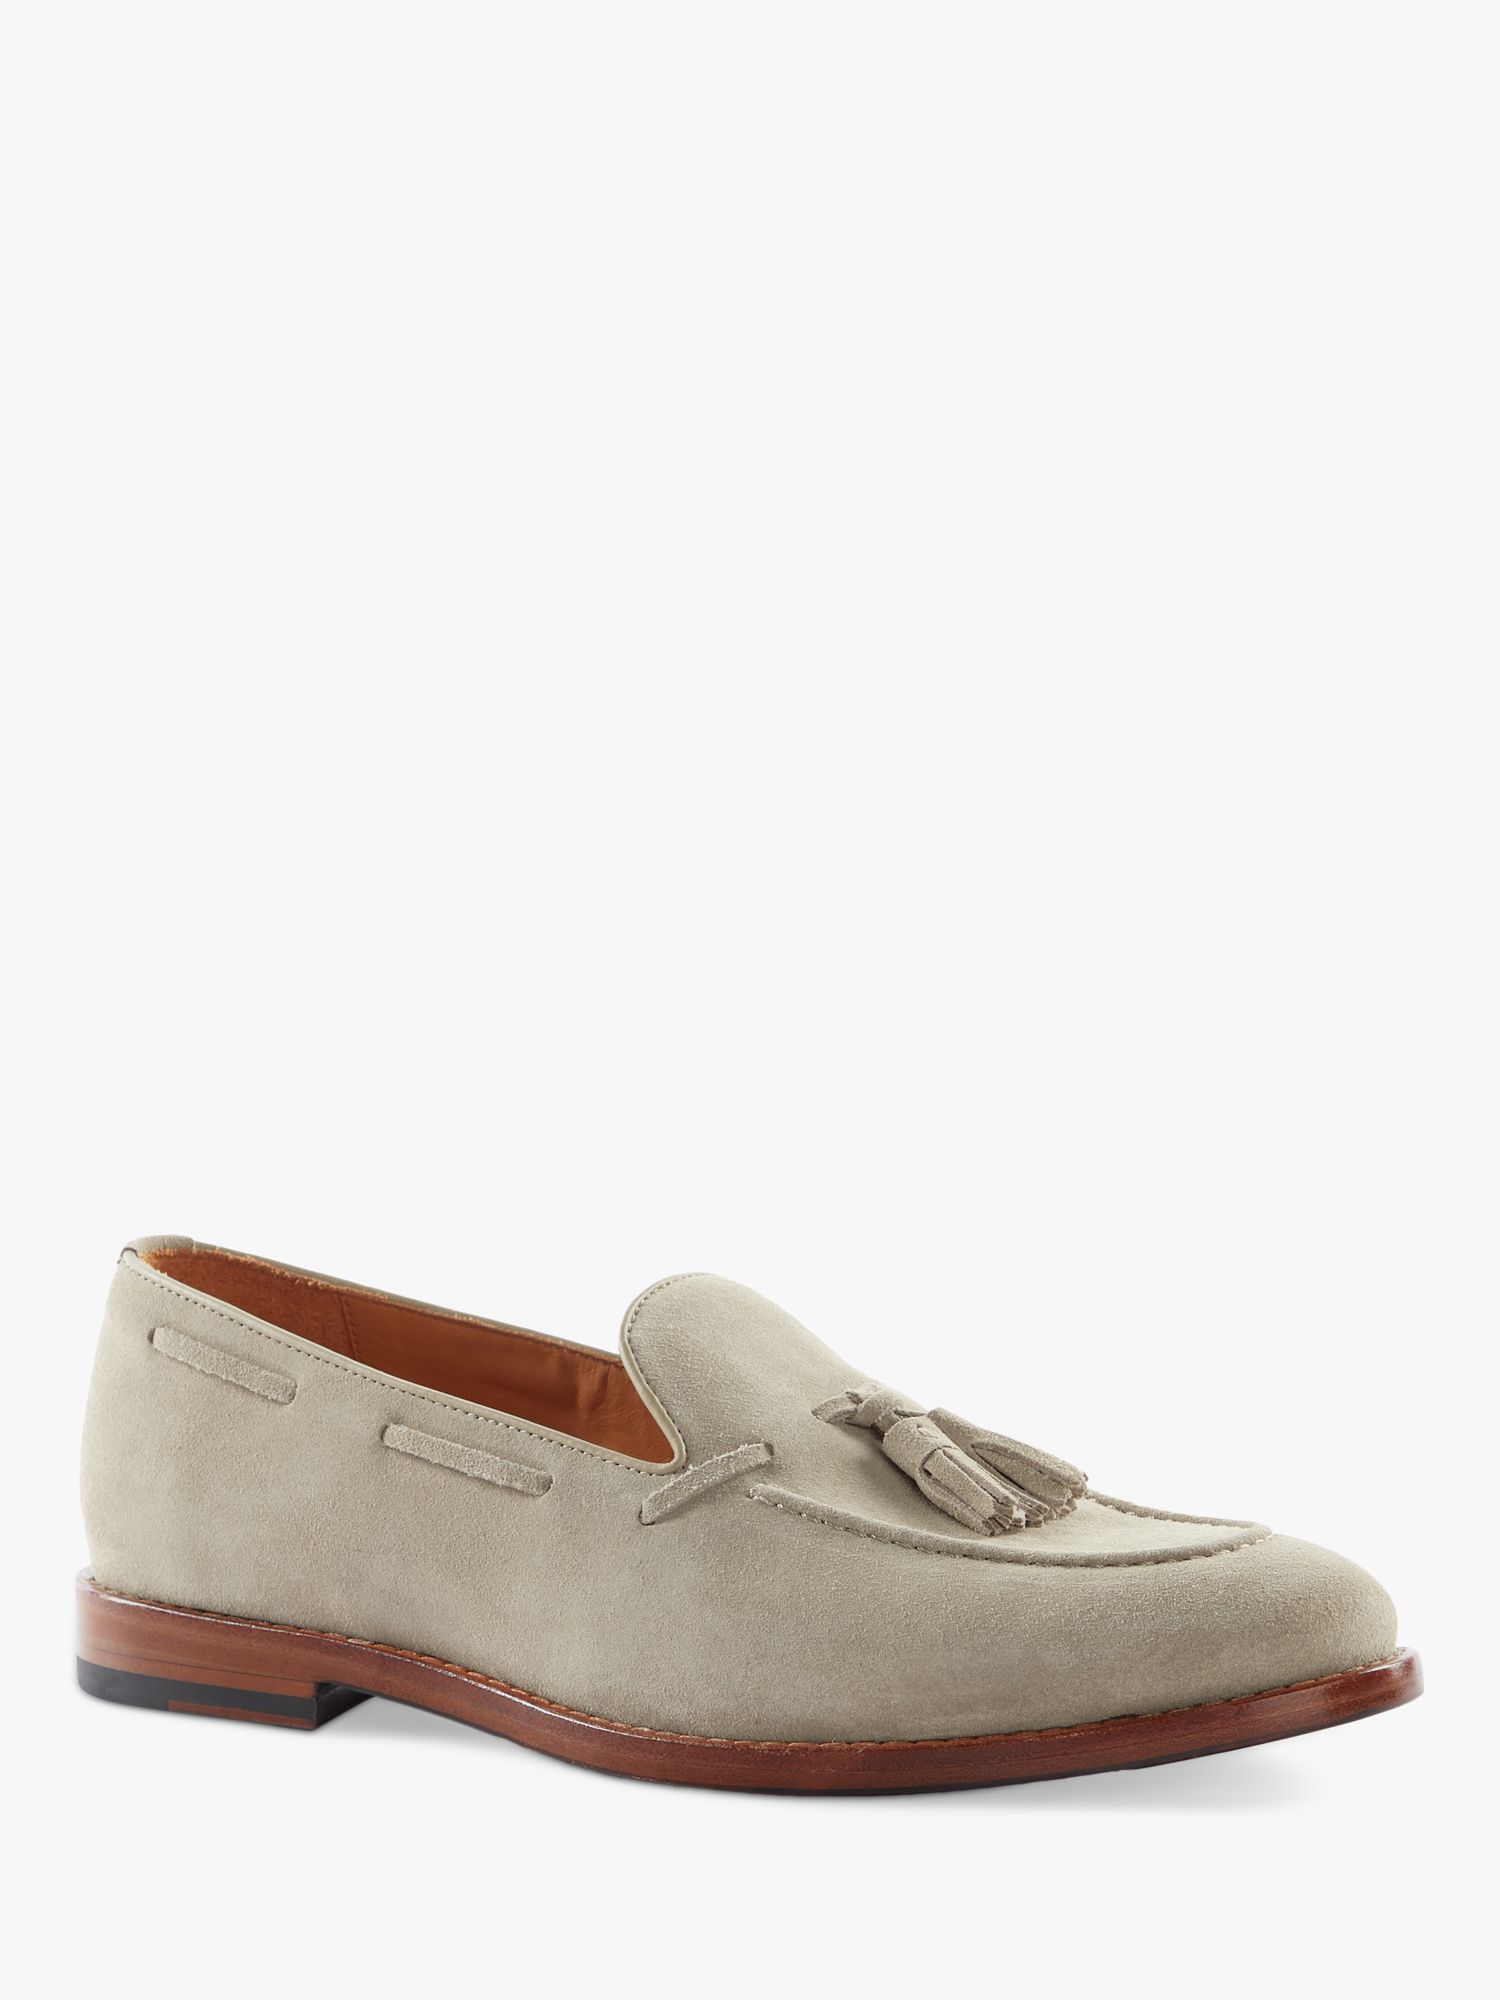 Dune Sandders Leather Tassel Loafers, Taupe, 6